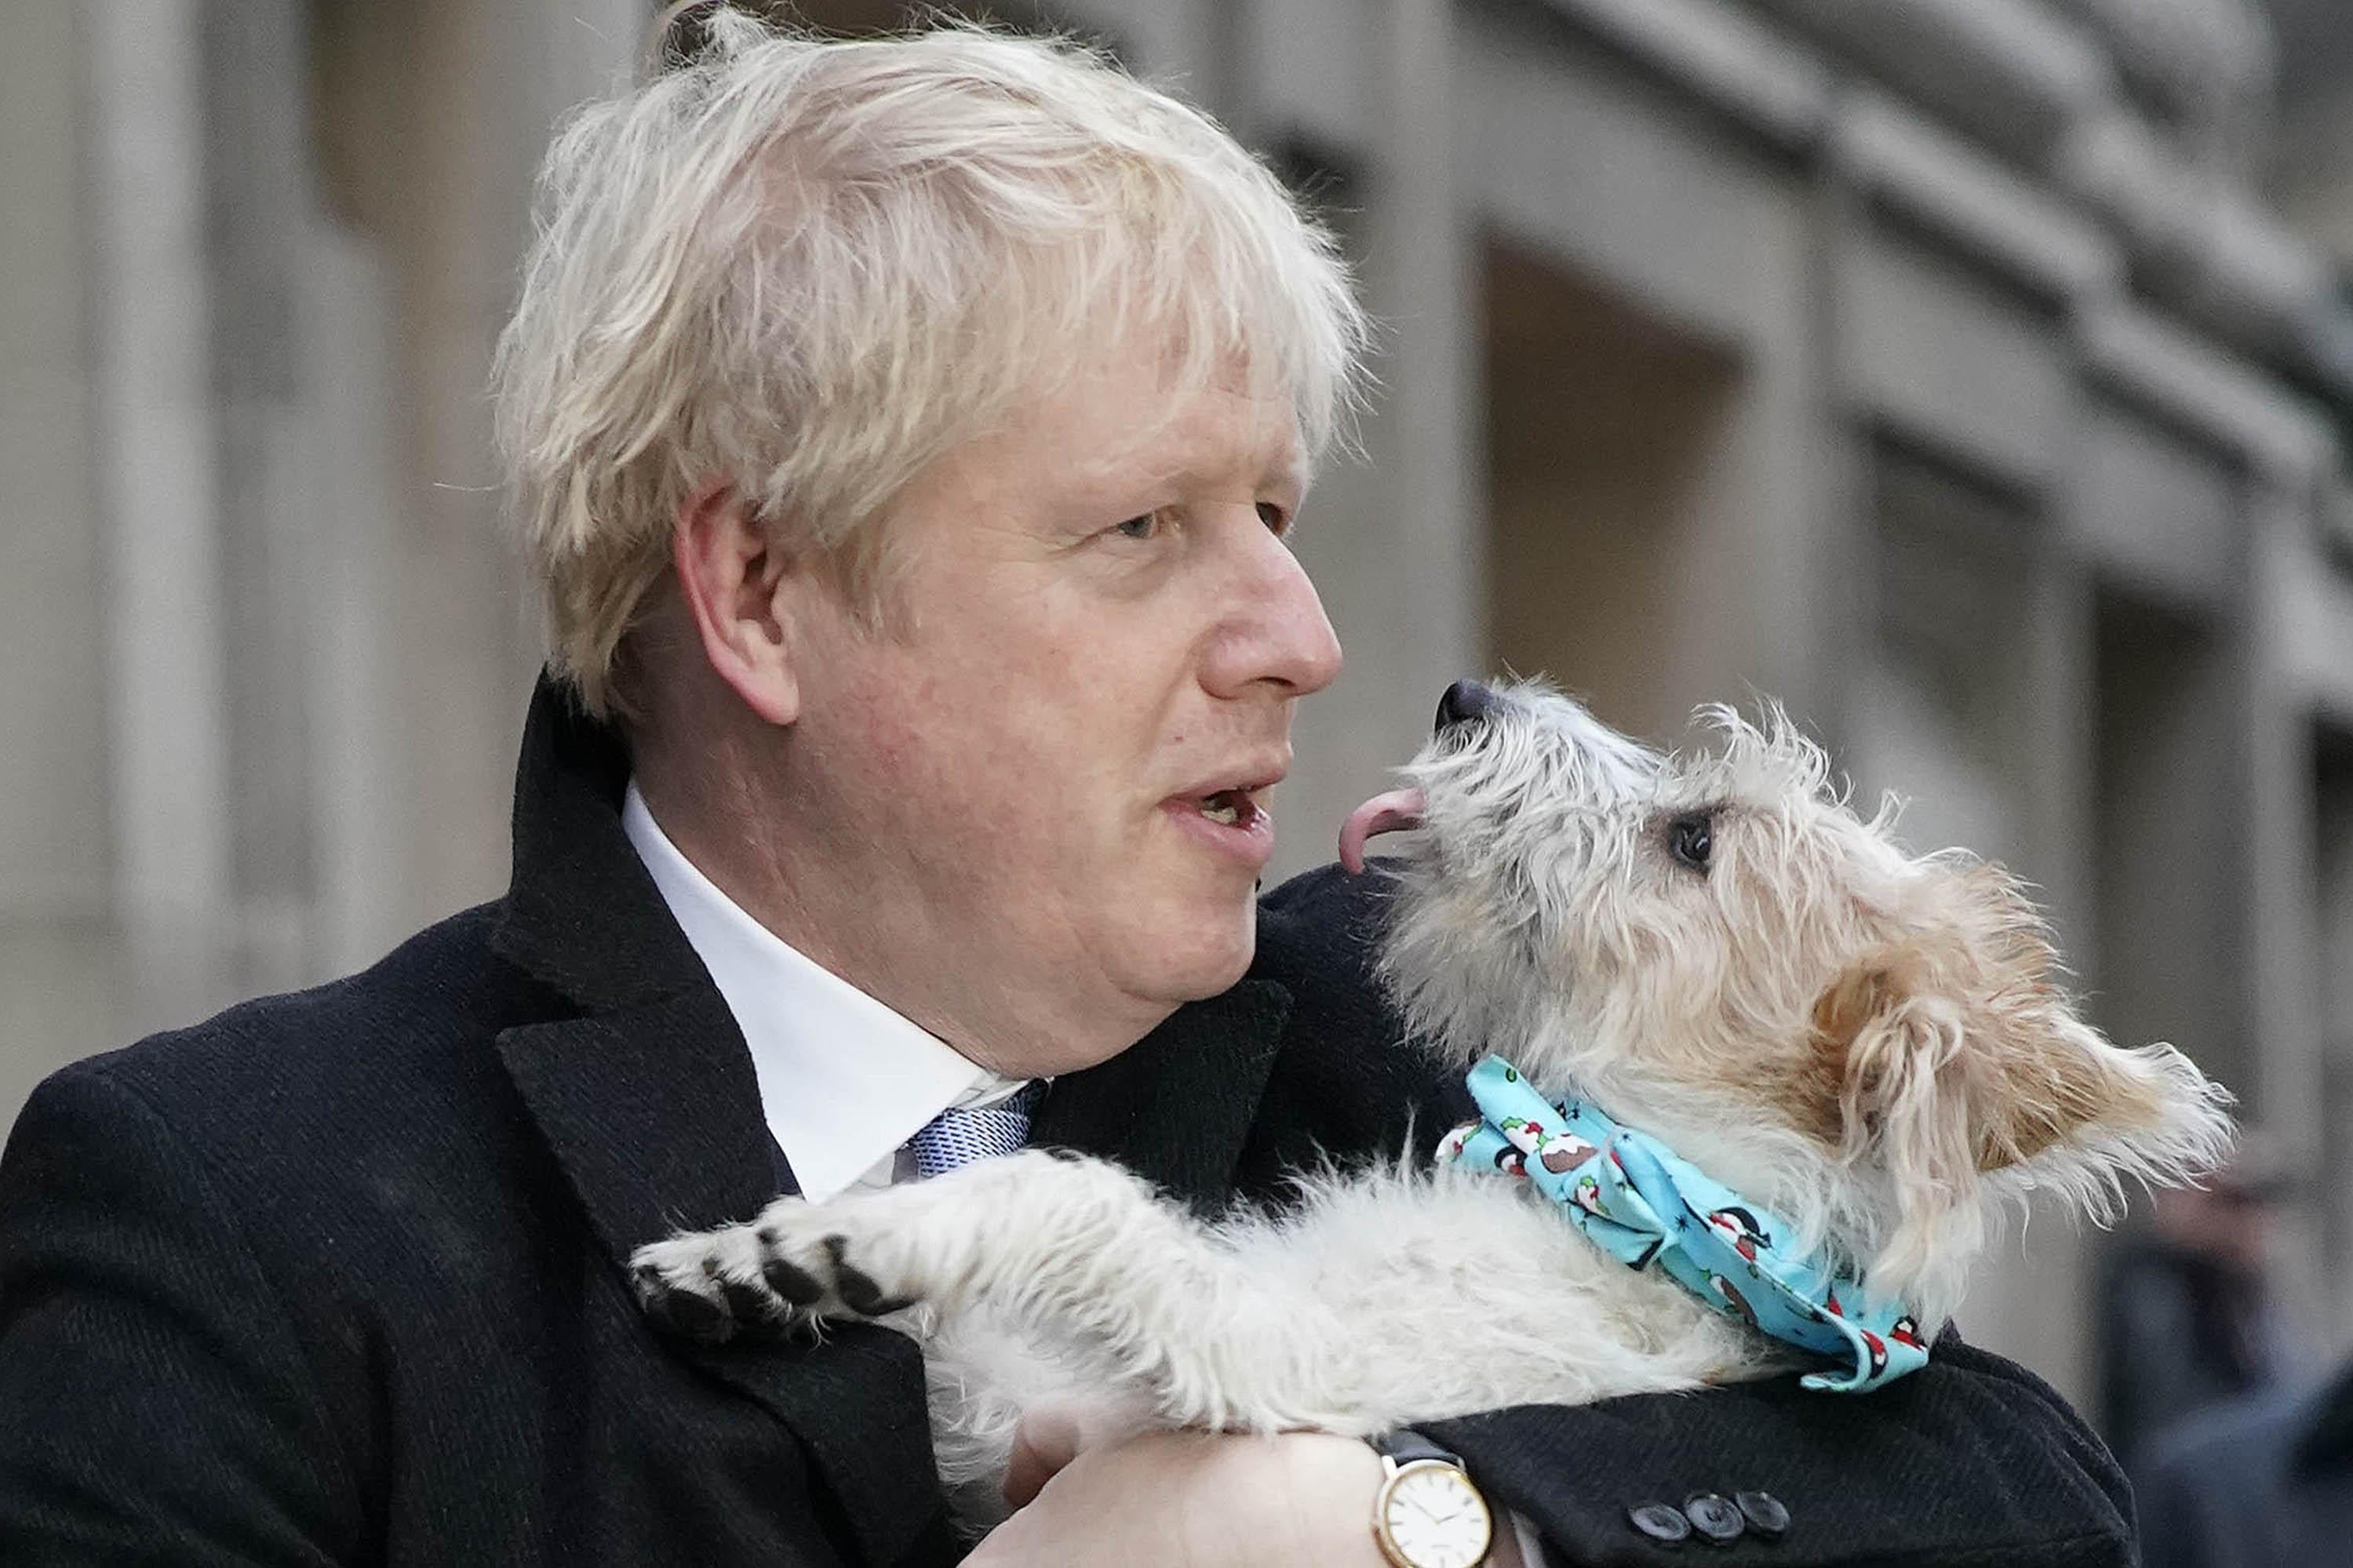 Boris Johnson holds a dog next to his face. The dog's tongue is out, mid-lick.